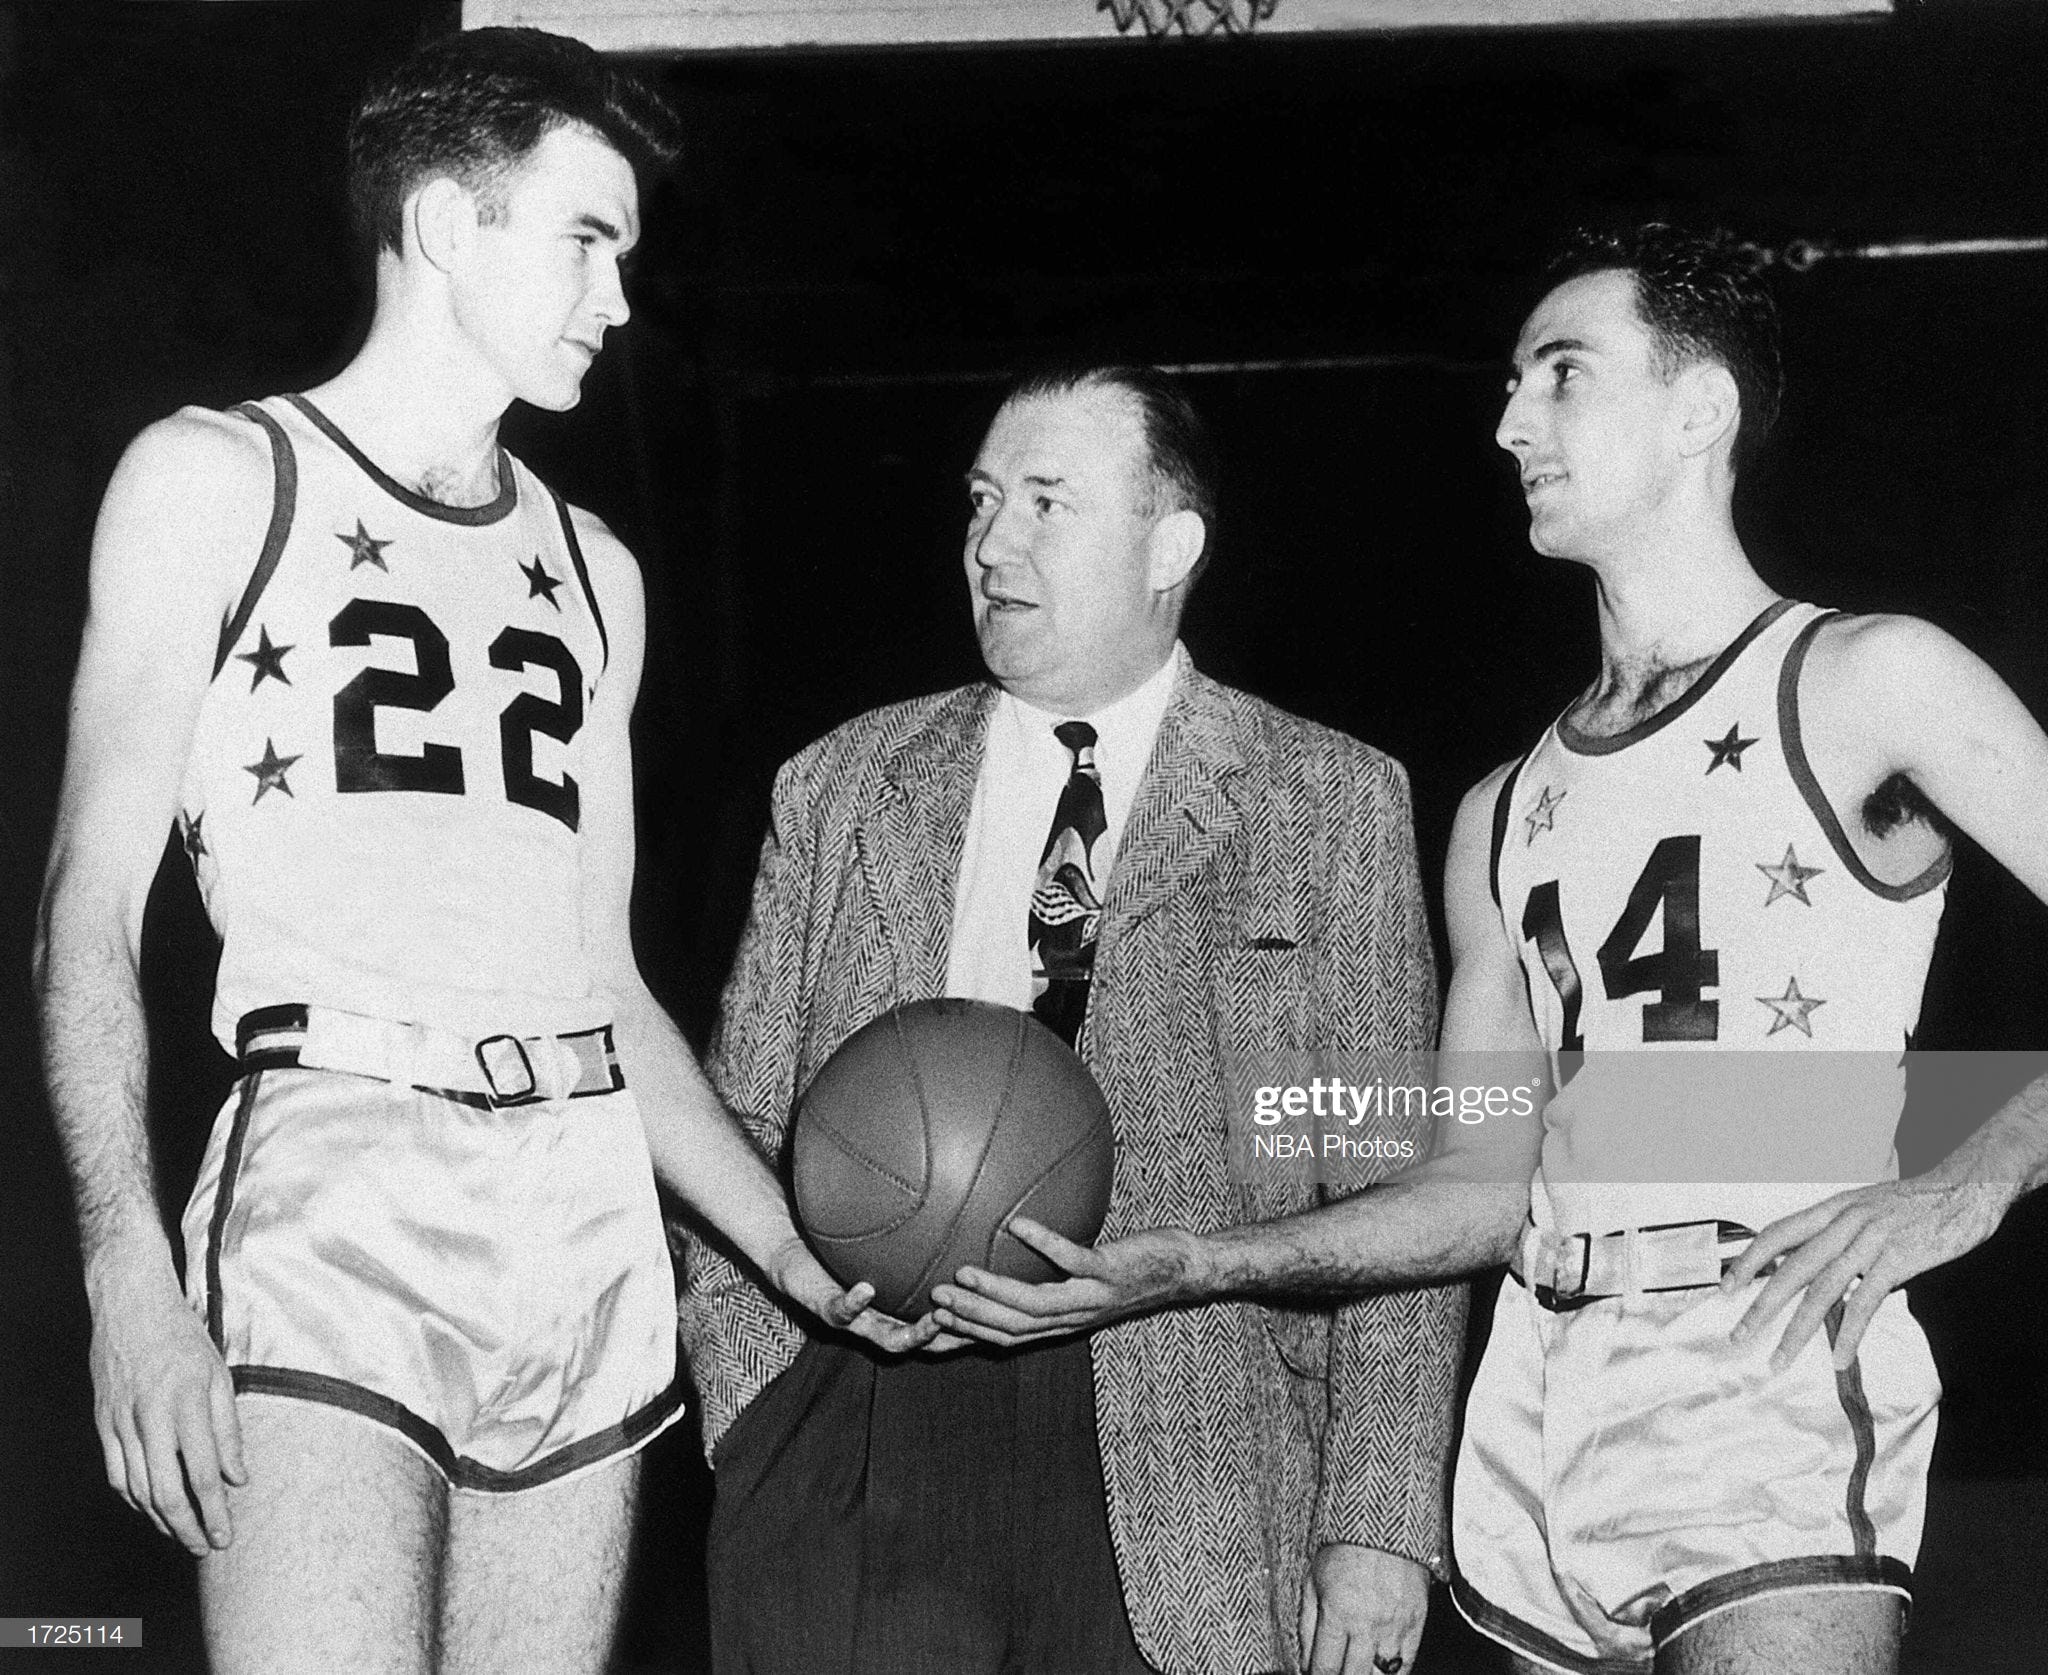 Remembering when the Rochester Royals won the NBA championship in 1951